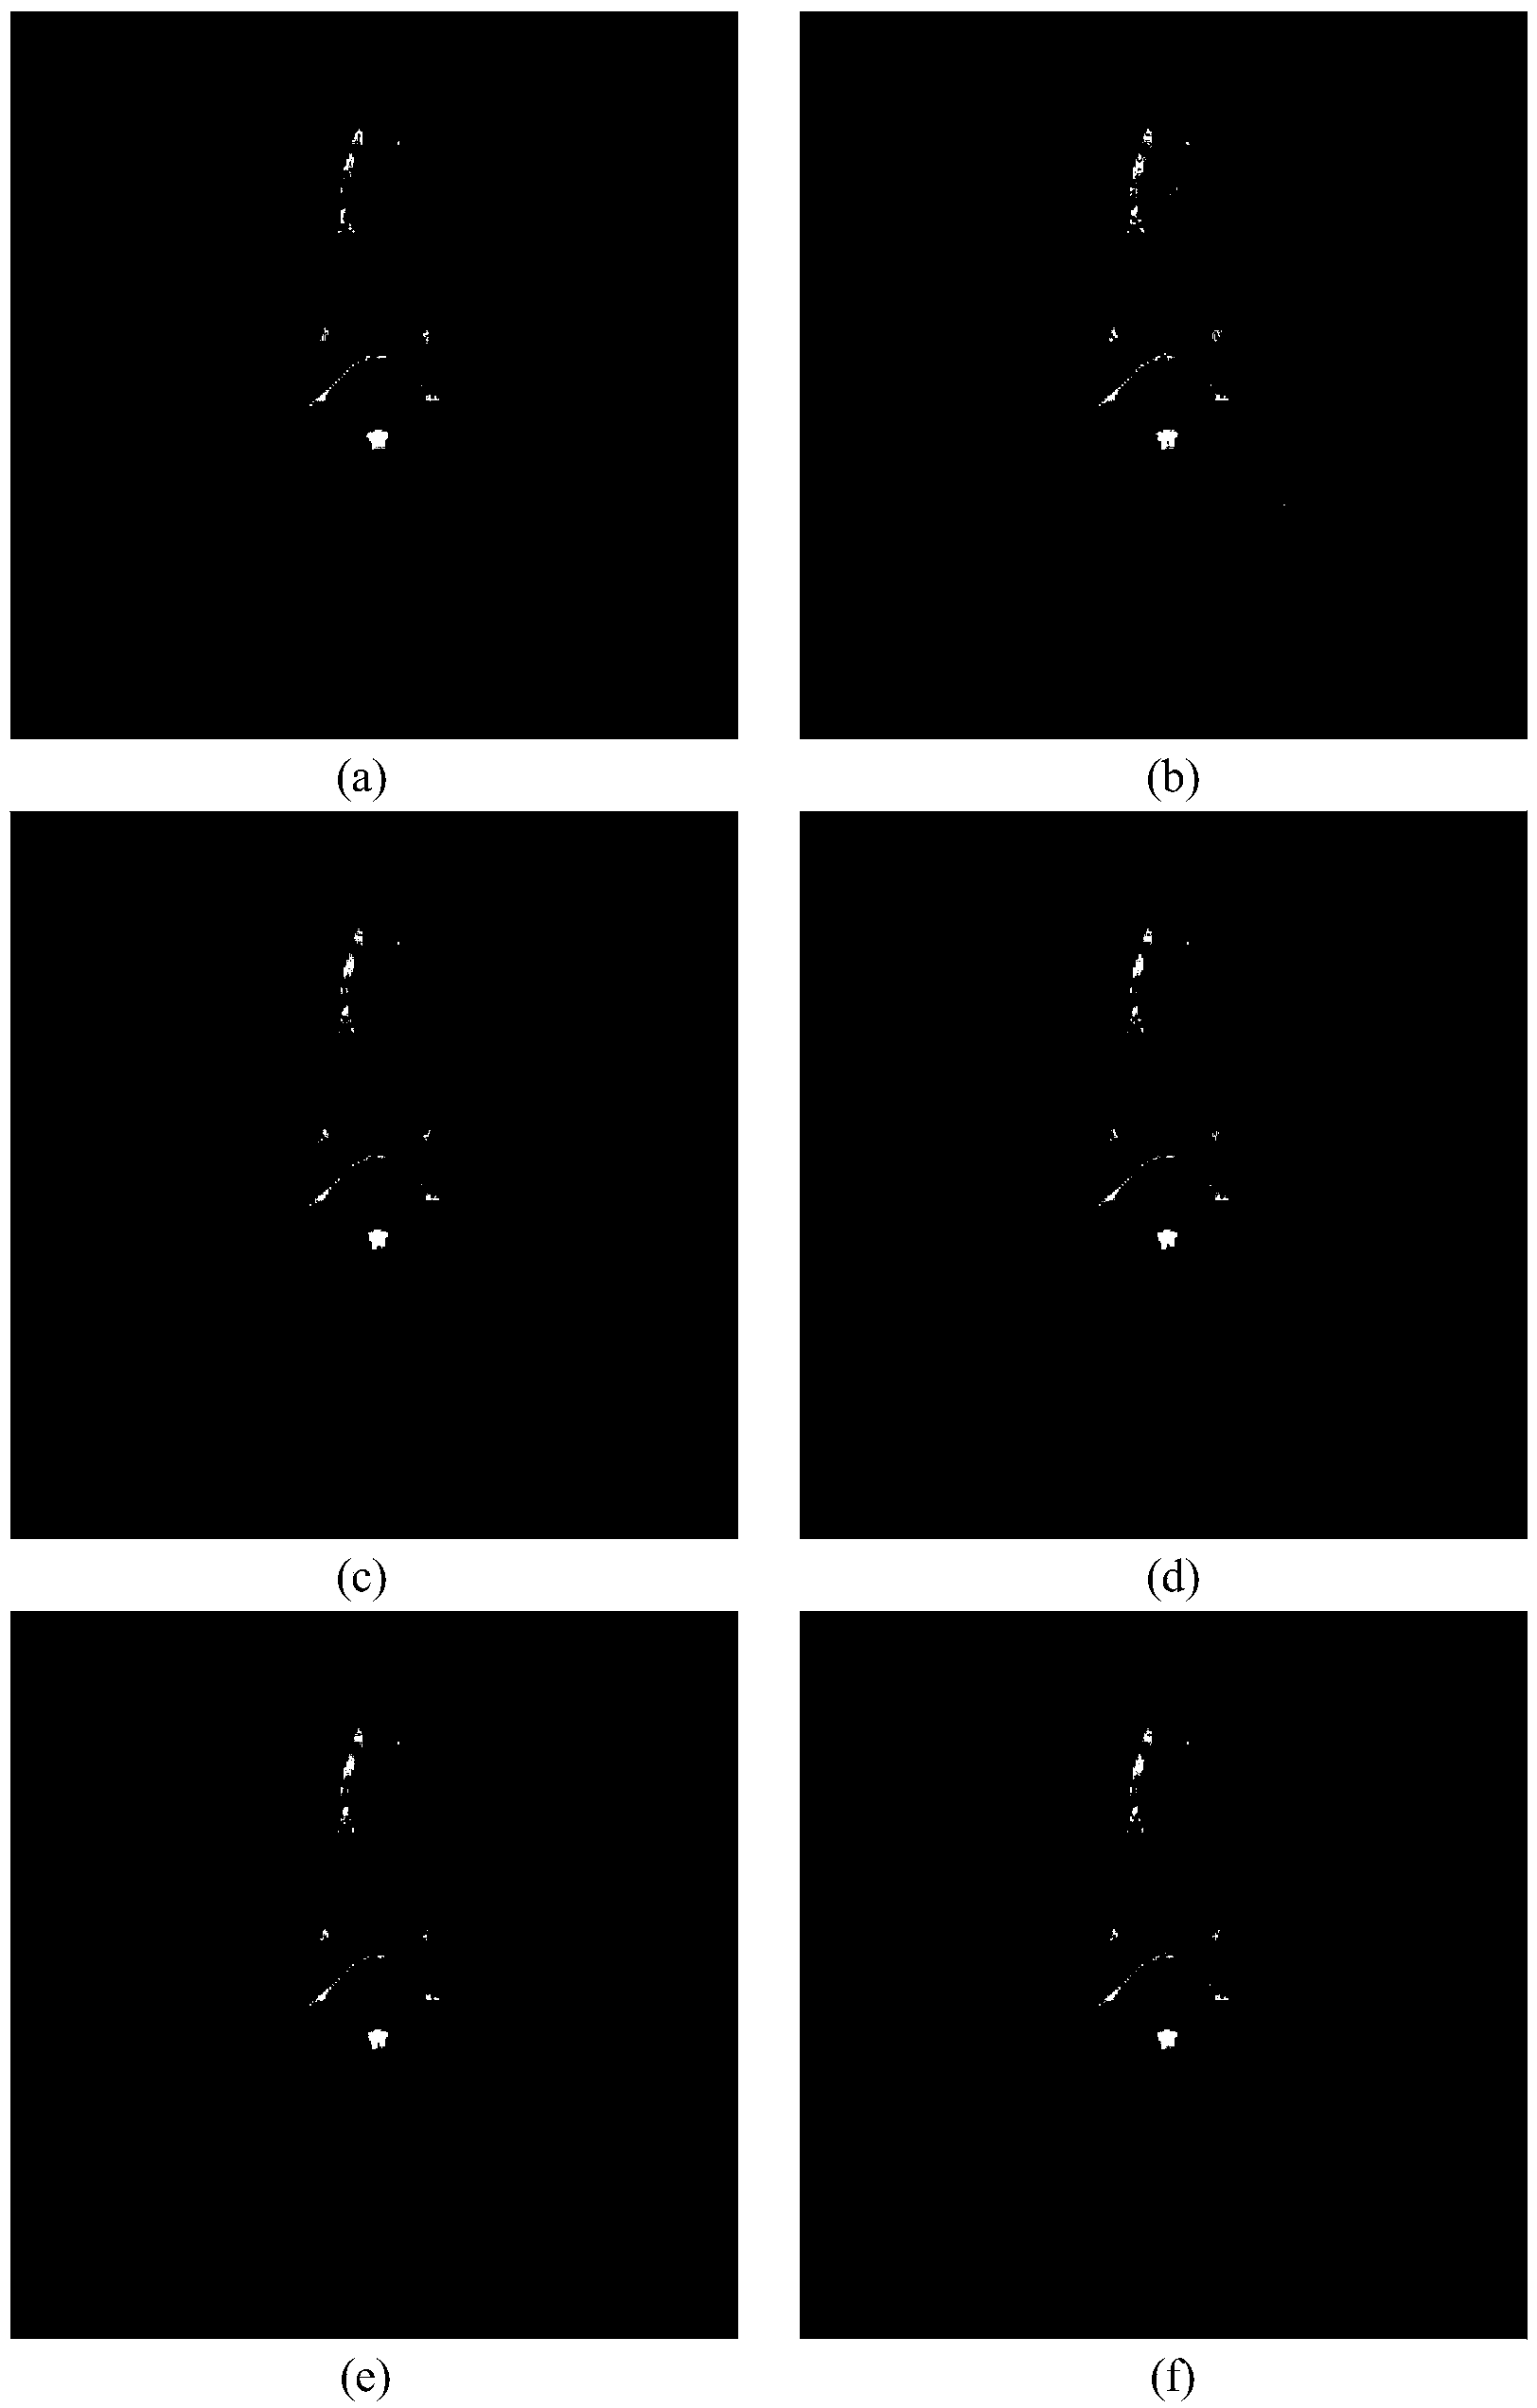 Medical image noise reduction method based on structure clustering and sparse dictionary learning